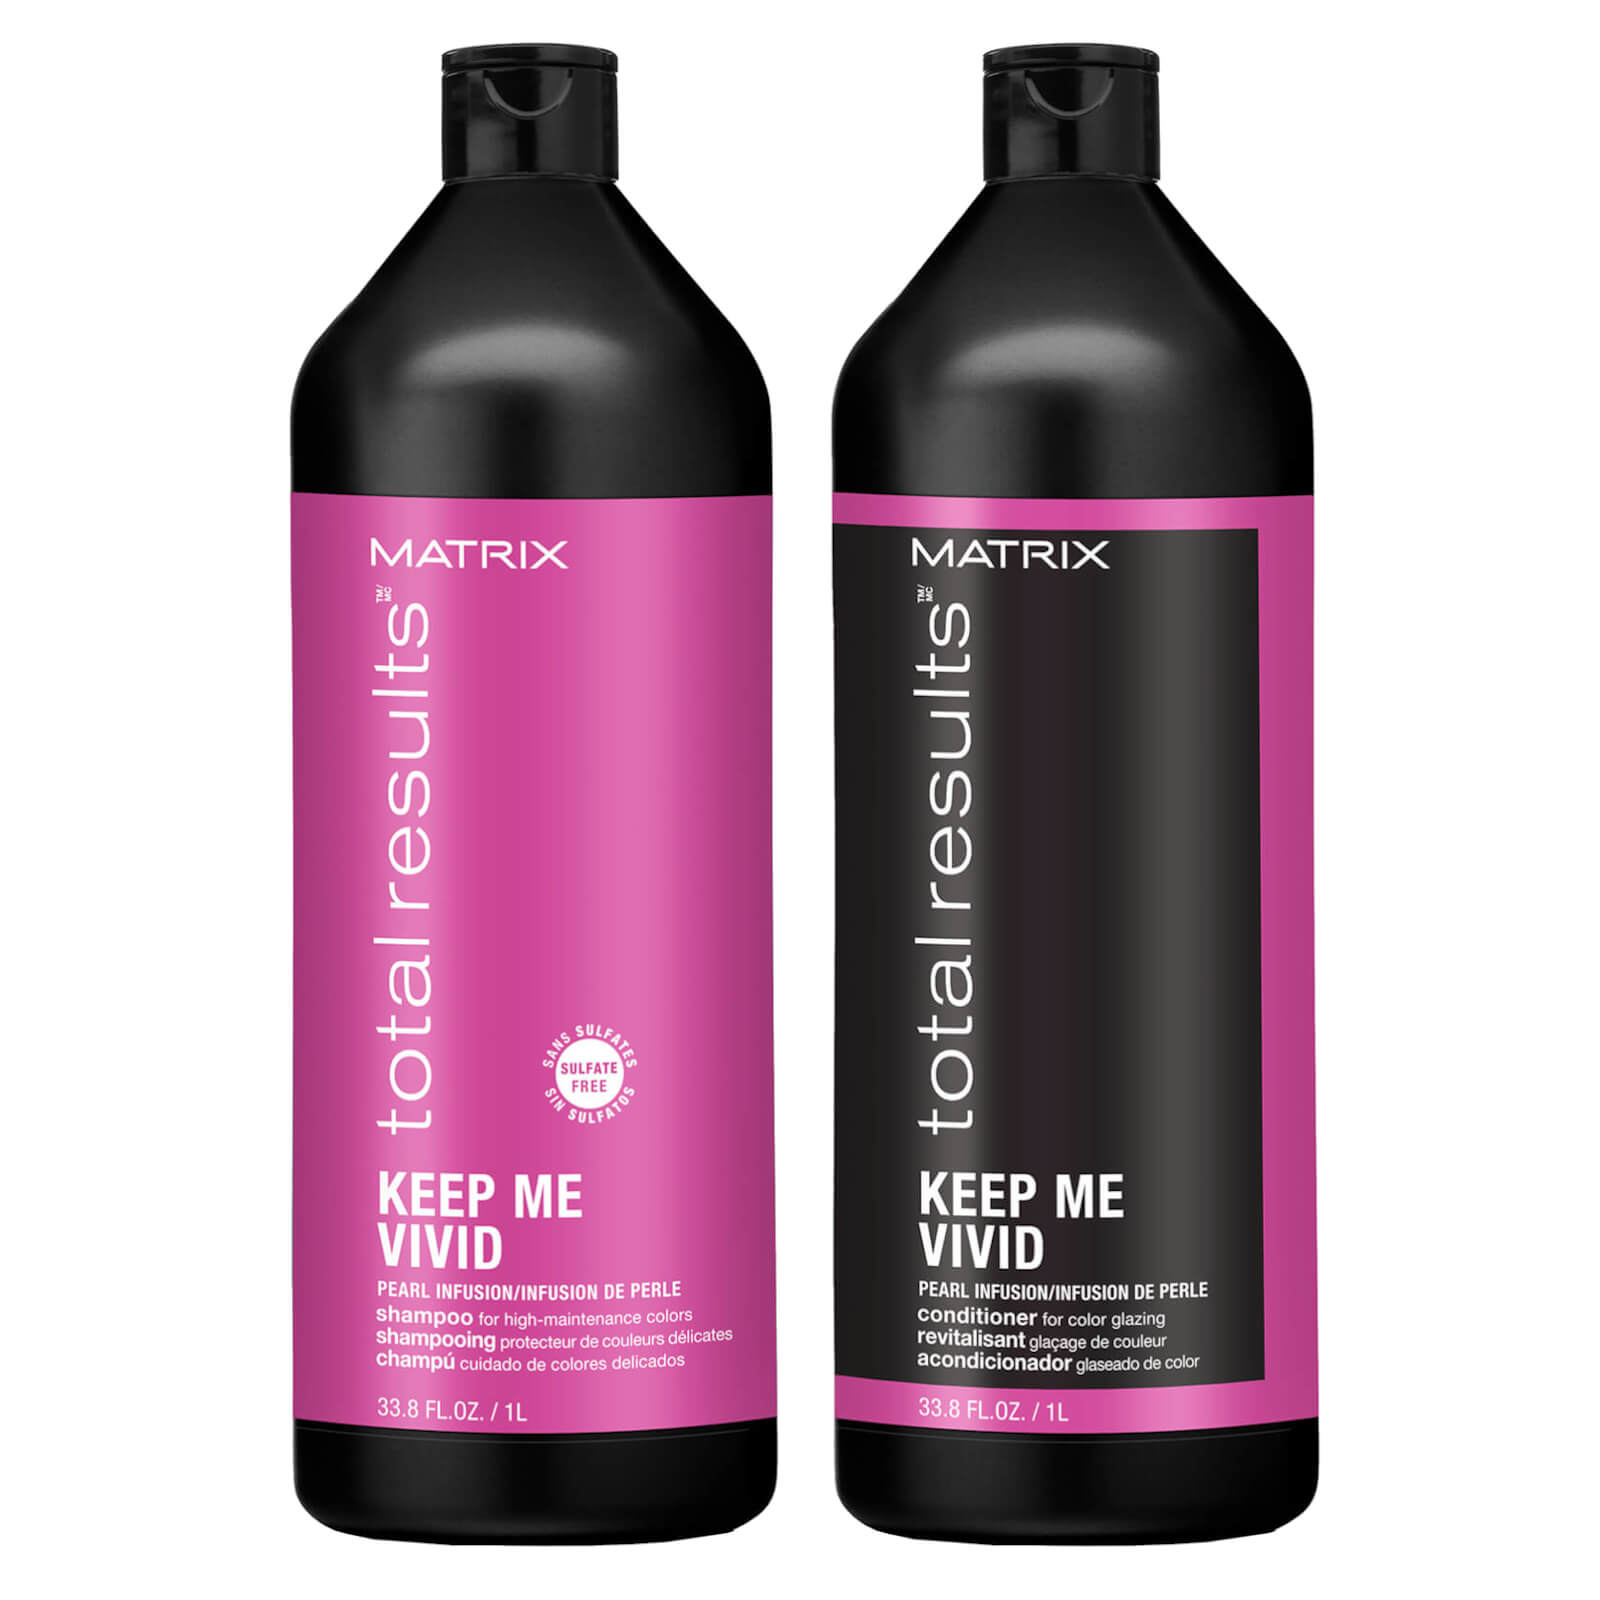 Matrix Keep Me Vivid Colour Protecting Shampoo and Conditioner 1000ml Duo Set for High Maintenance C